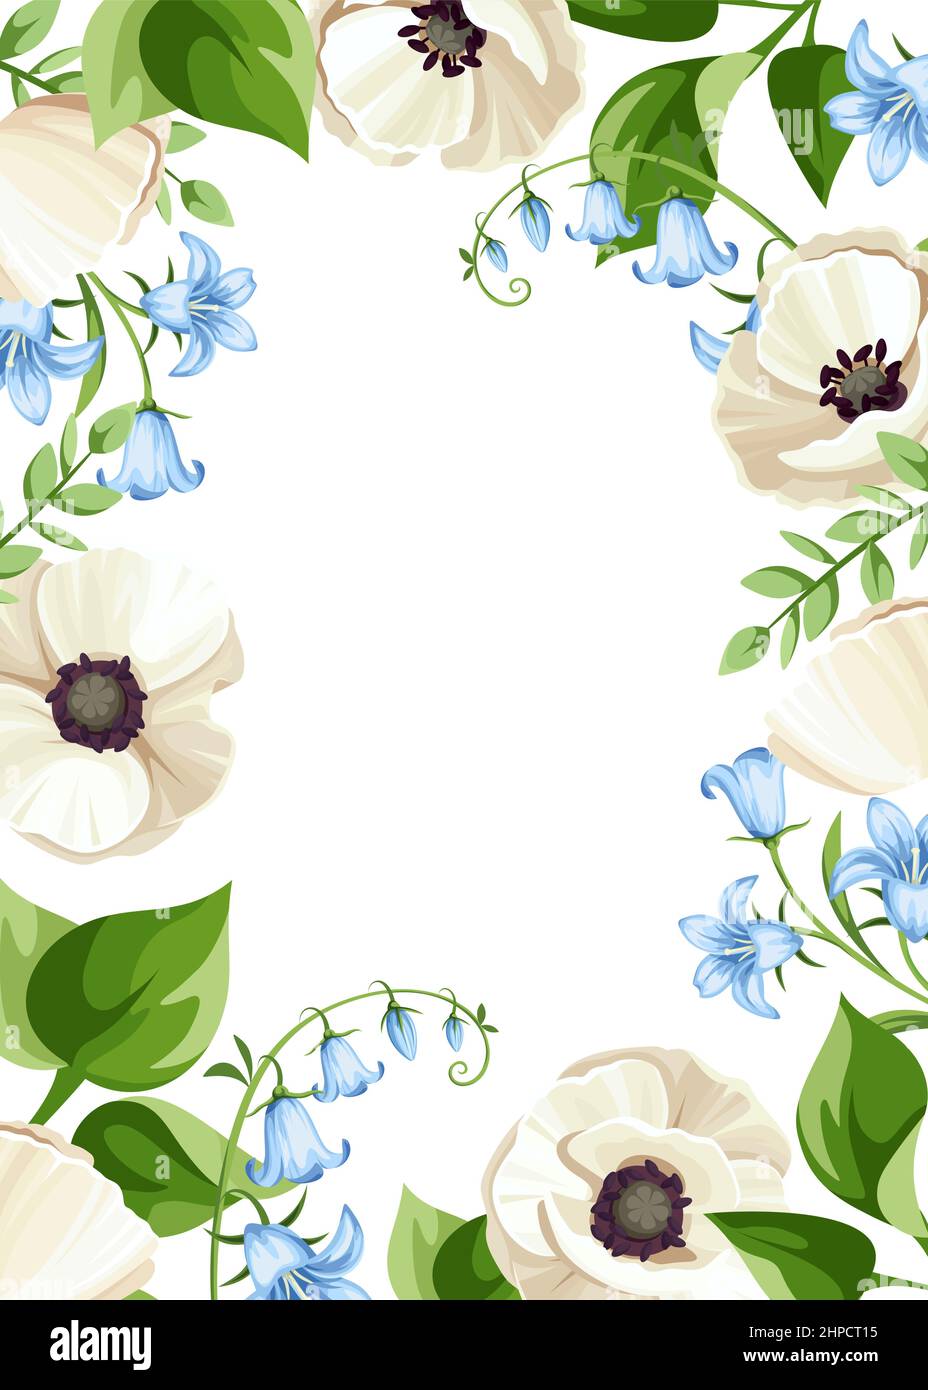 Vector card with white poppy flowers, blue bluebell flowers, and green leaves. Greeting or invitation card design Stock Vector